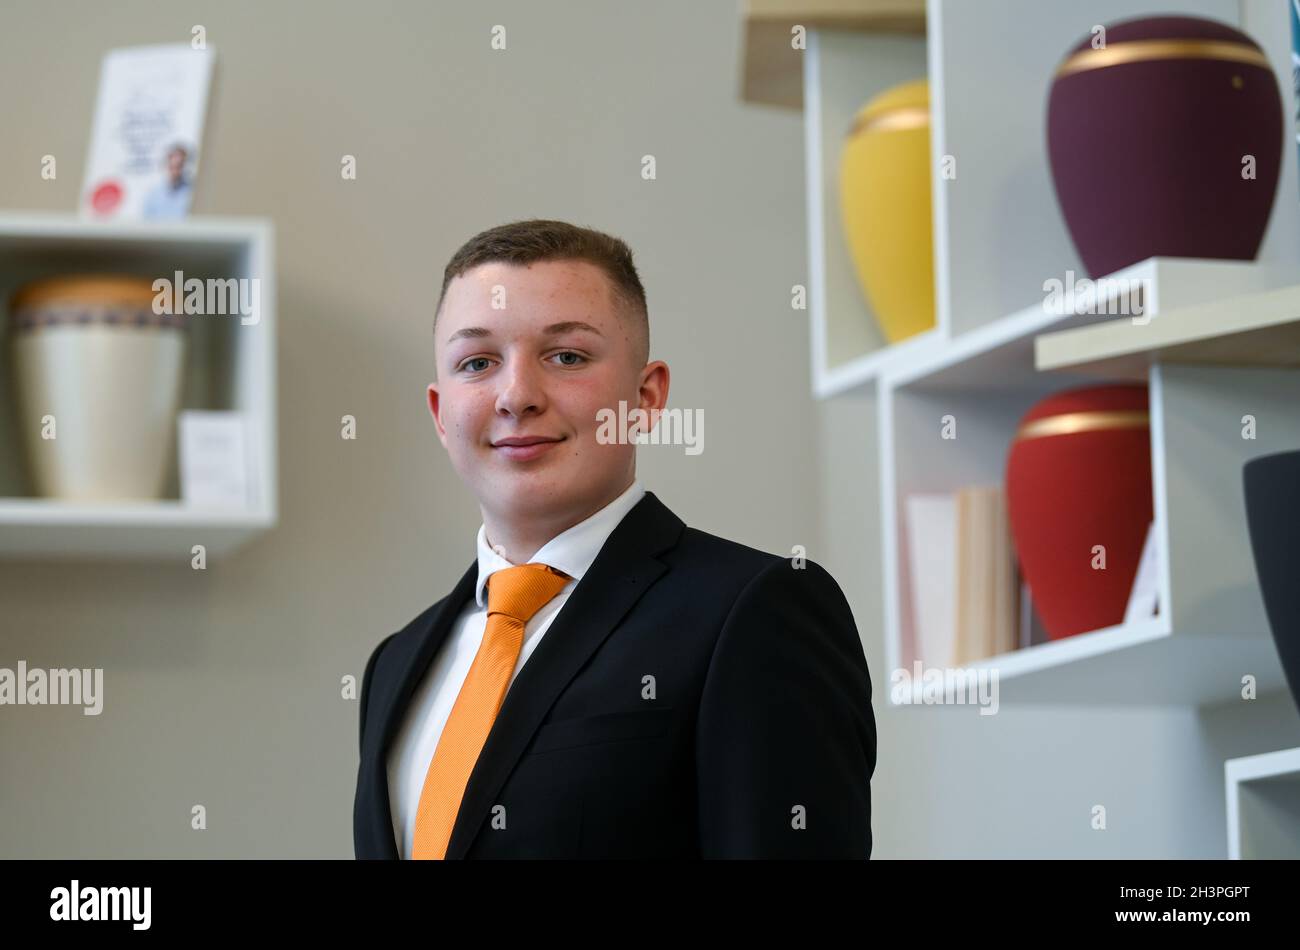 Leipzig, Germany. 18th Oct, 2021. Lennard Wehner stands in front of various urns in a consultation room at Ananke Funerals. As a budding funeral professional, Lennard is in his first year of apprenticeship at the funeral home. Funeral homes have no problems finding new recruits, according to industry sources. (to dpa 'Popular profession: funeral homes have no worries about finding new recruits') Credit: Hendrik Schmidt/dpa-Zentralbild/dpa/Alamy Live News Stock Photo